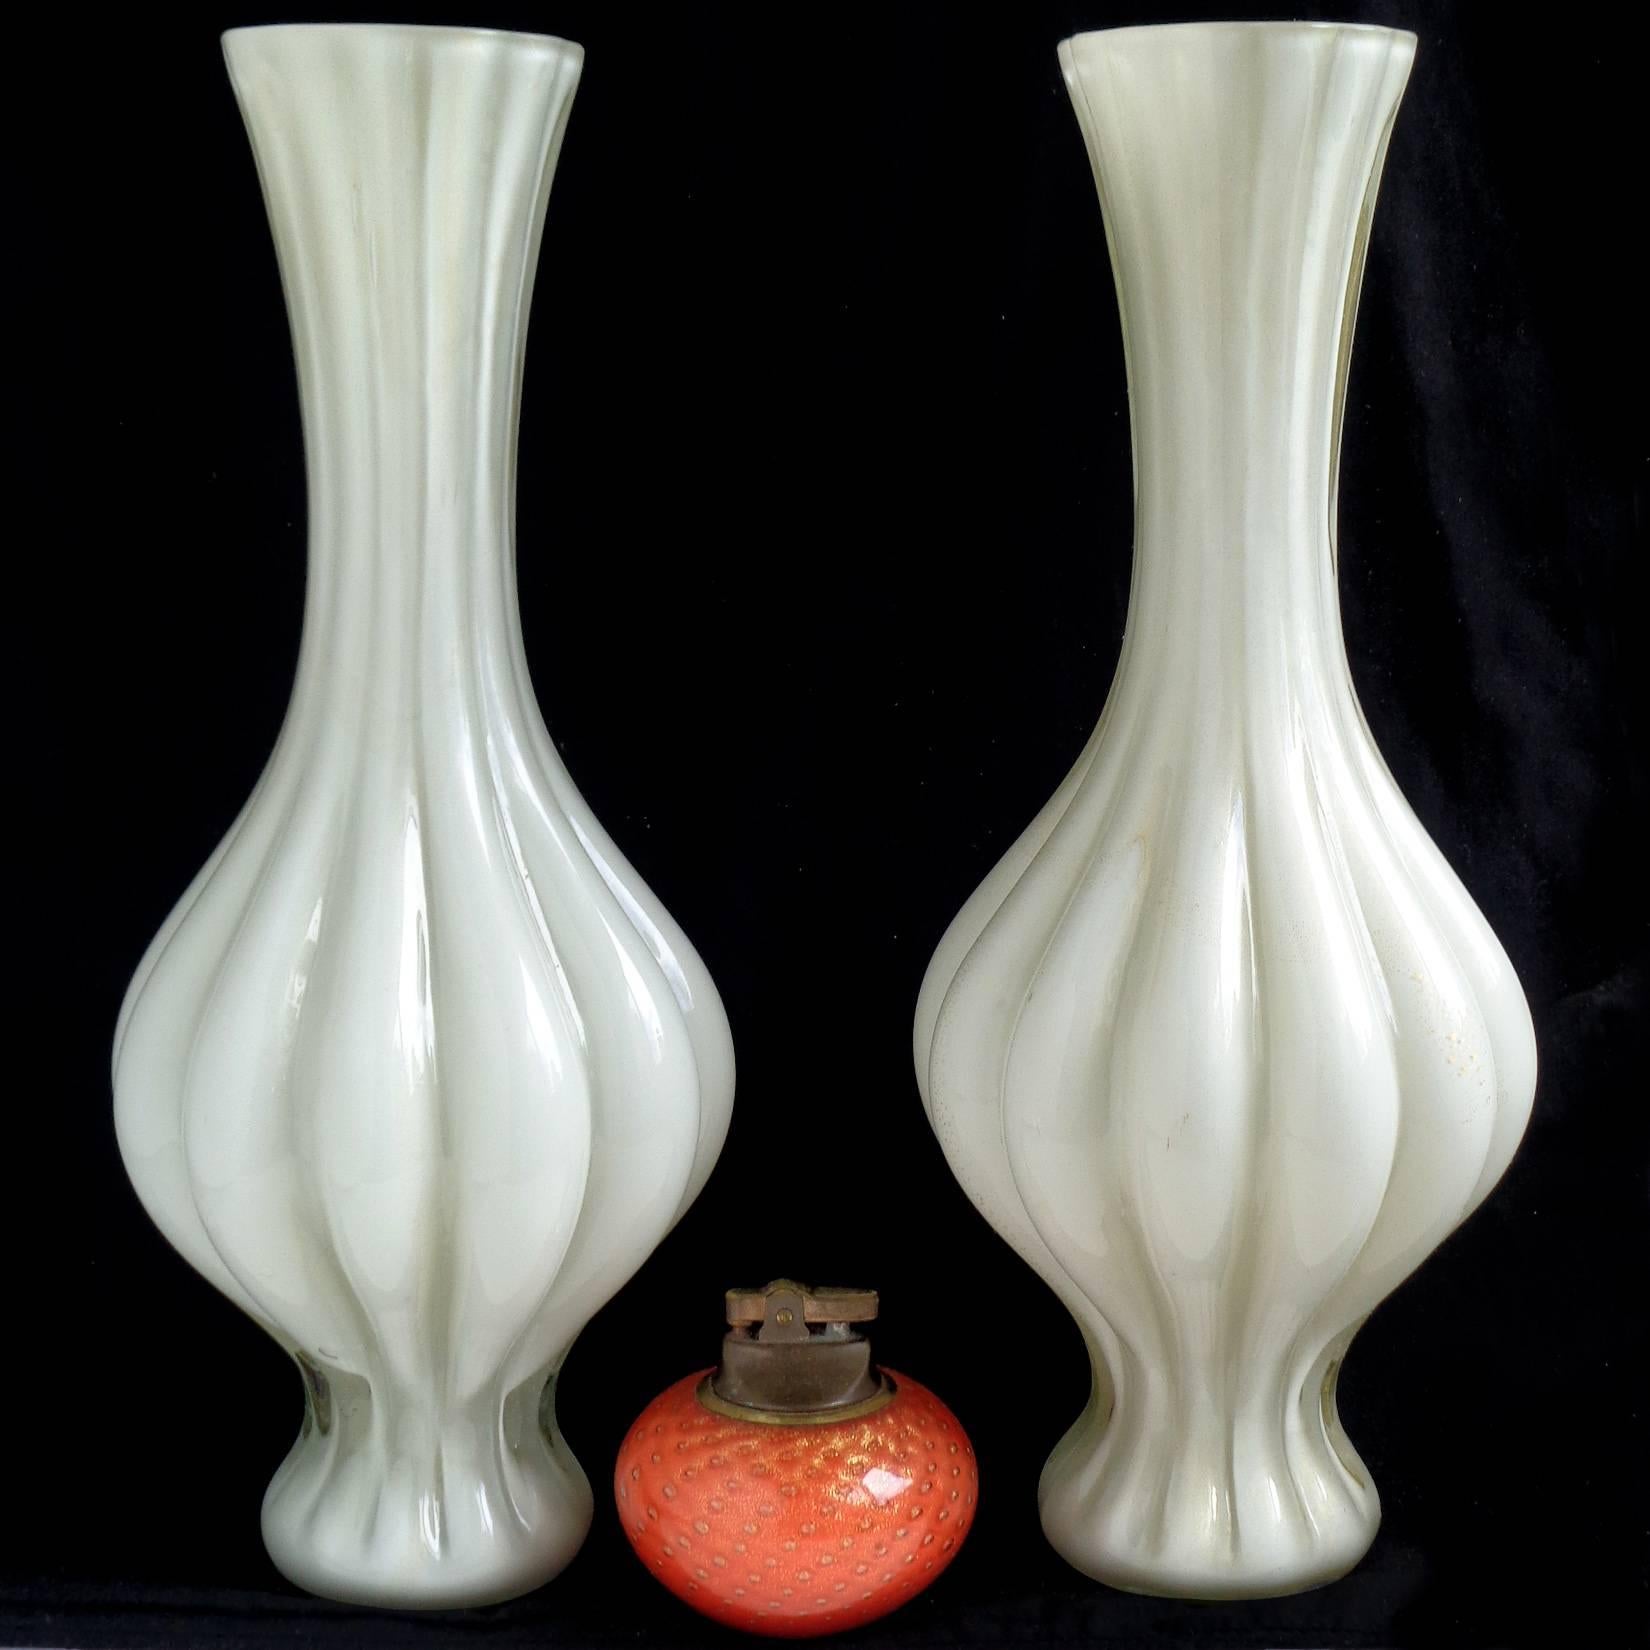 Free shipping worldwide! See details below description.

Matching pair of Murano handblown bone/light gray/white and gold flecks art glass flower vases. Created in the manner of Archimede Seguso and Alfredo Barbini. The vases have flat polished